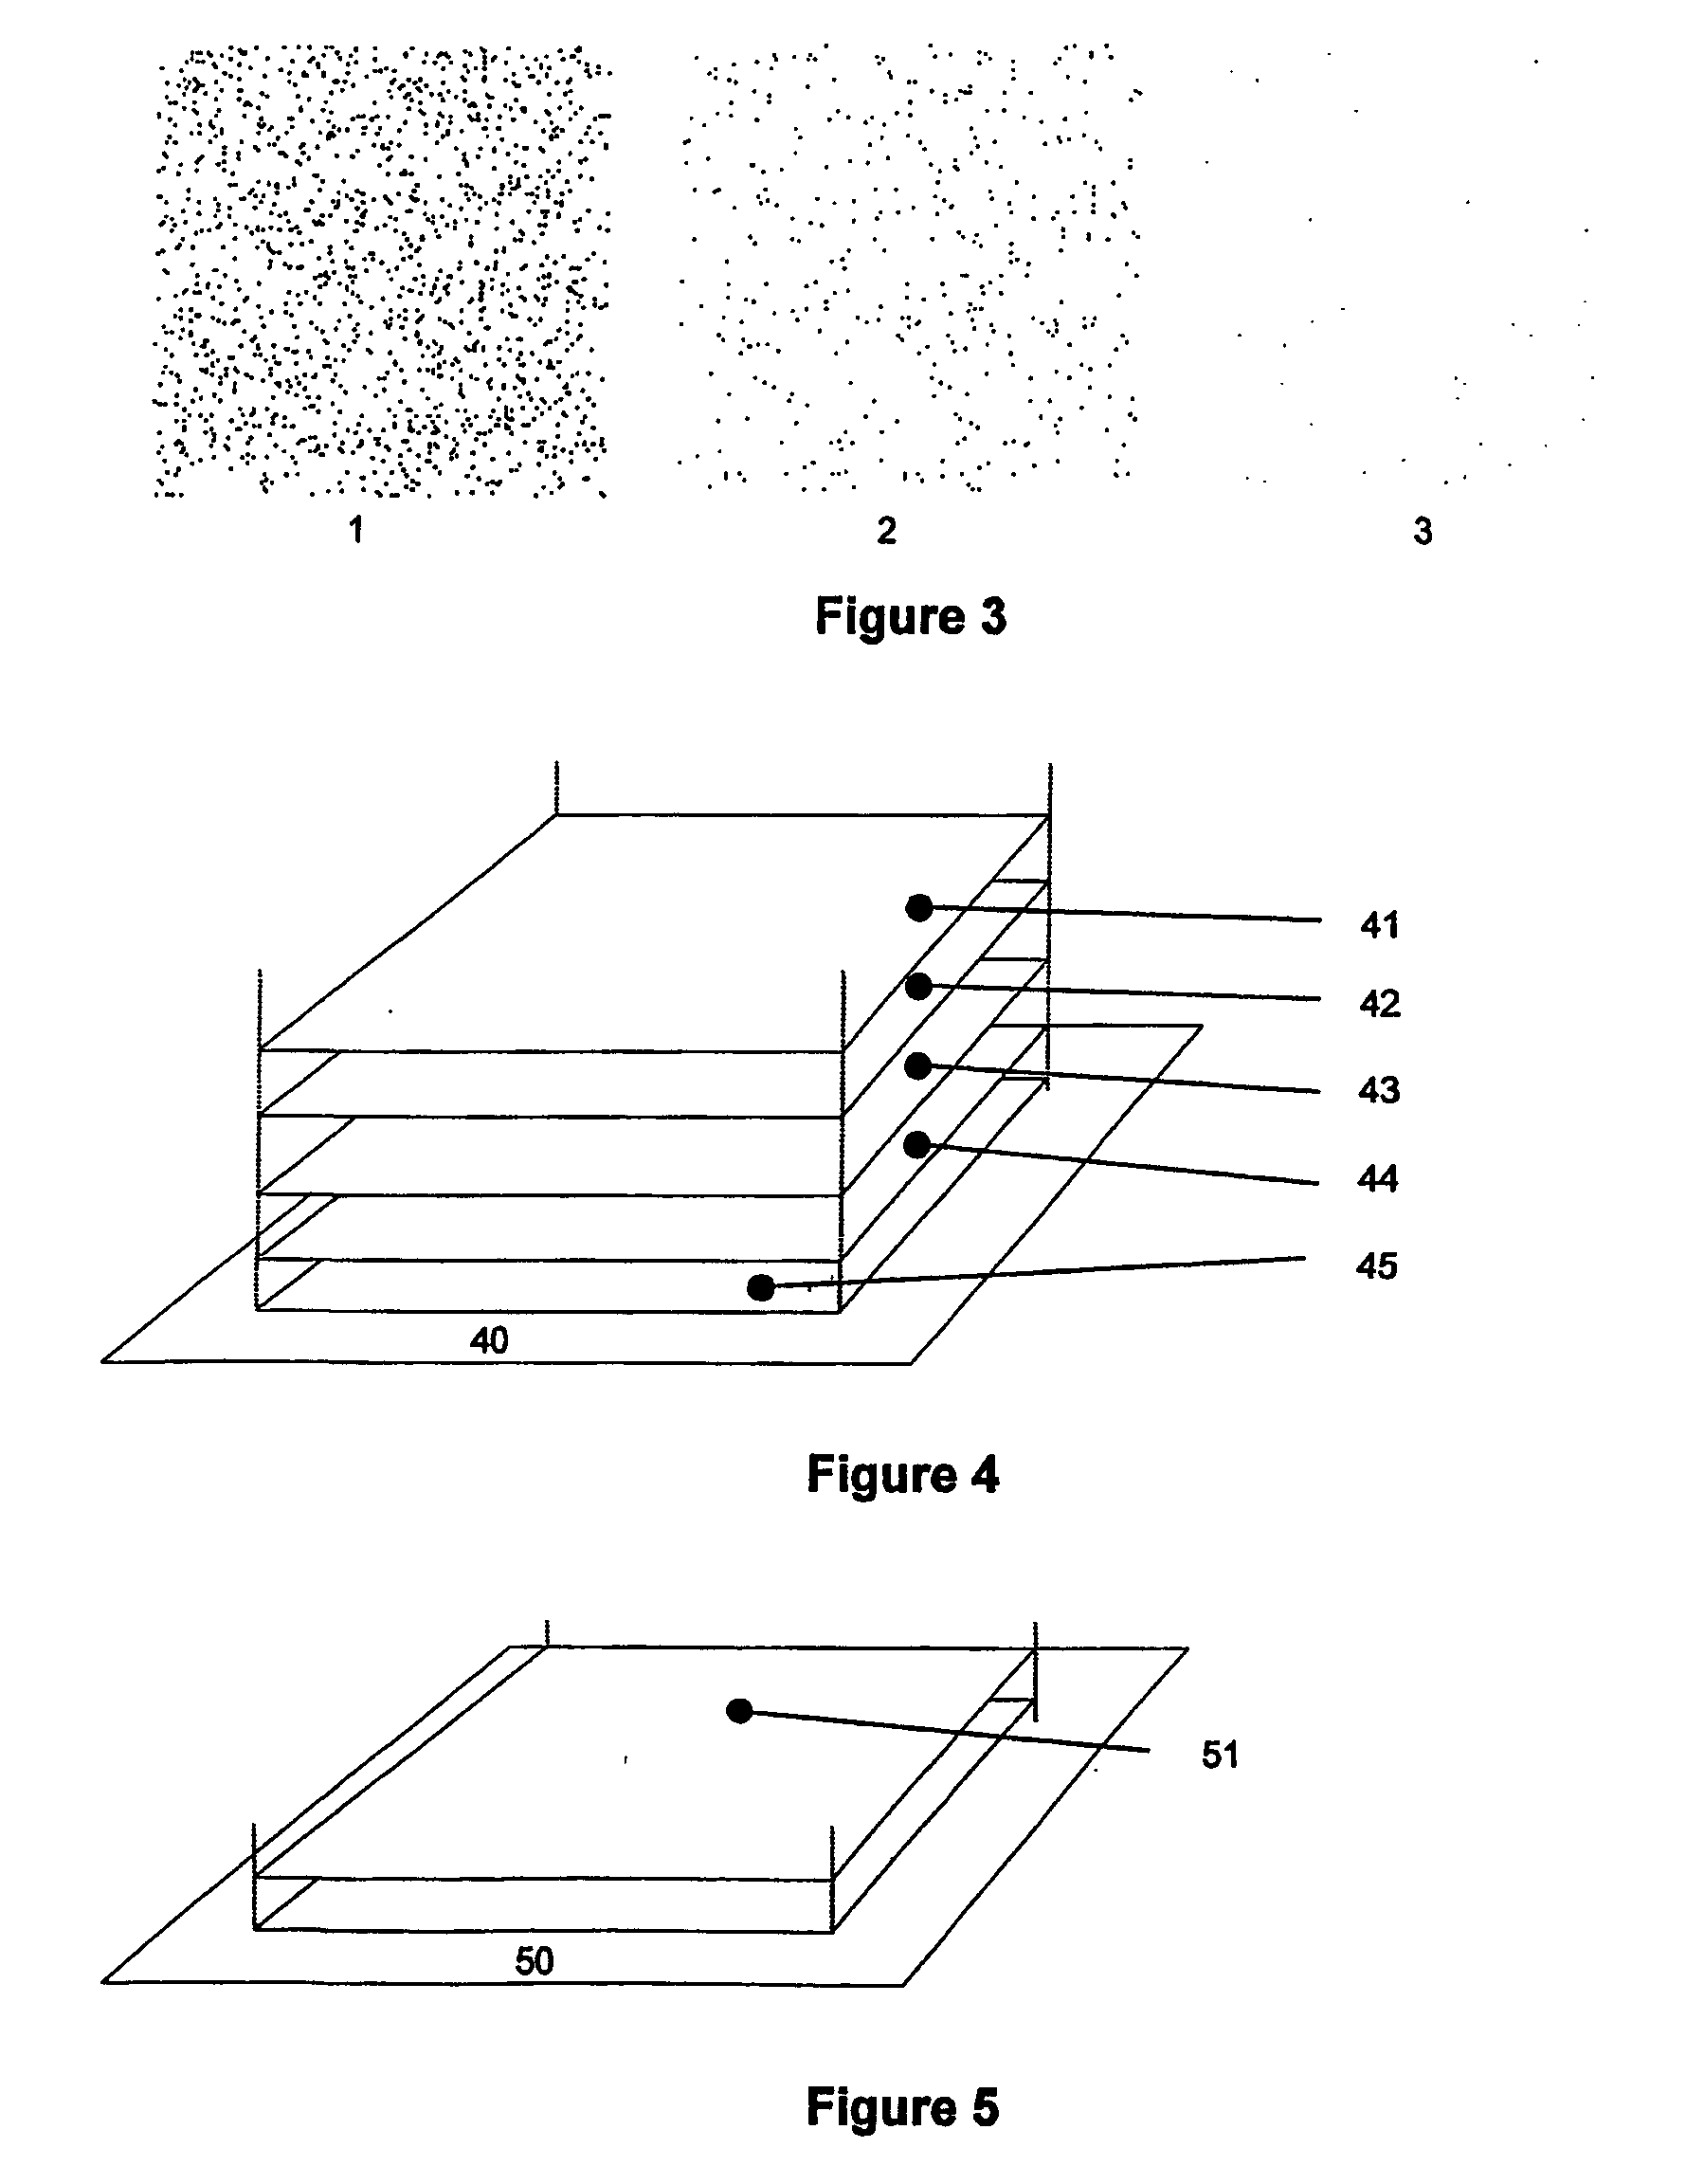 Method for preventing counterfeiting or alteration of a prited or engraved surface